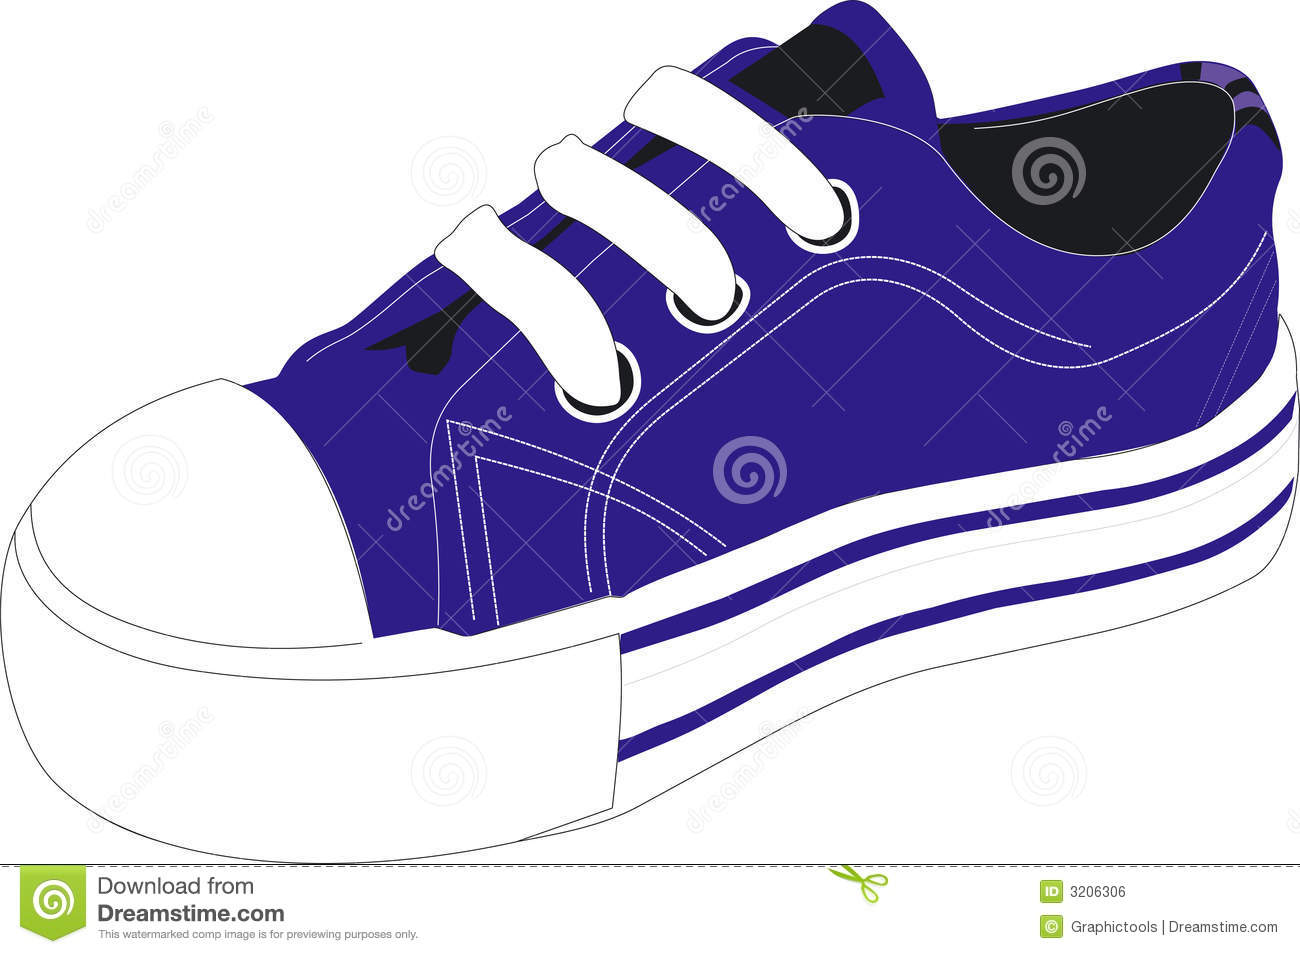 Shoe clipart #17, Download drawings